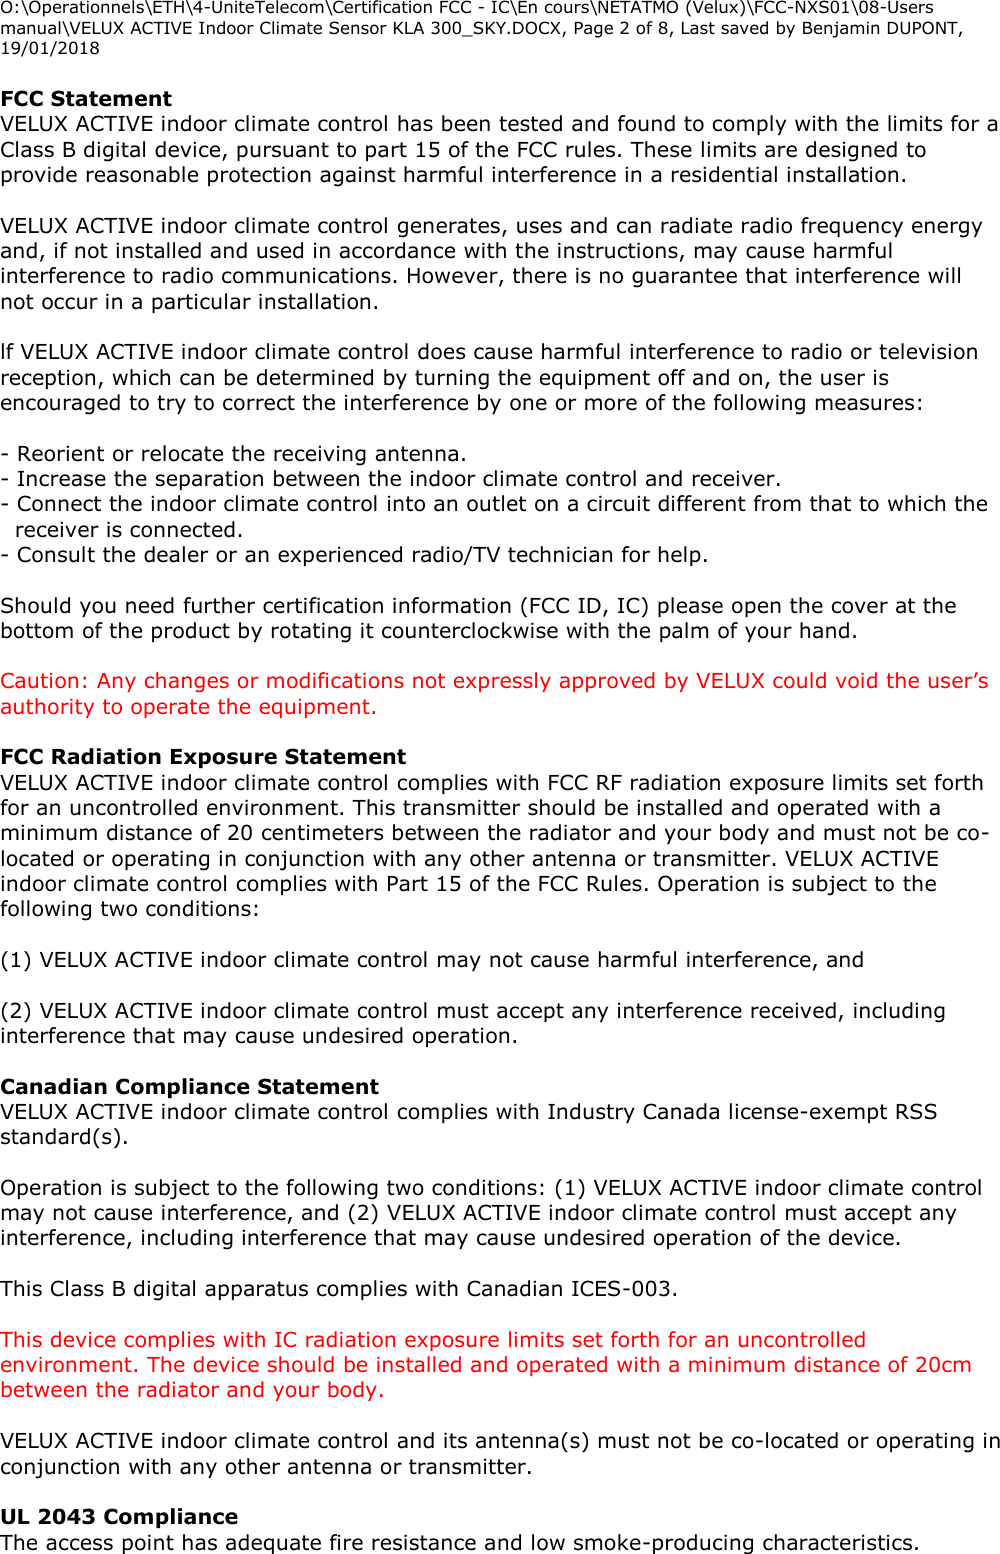 O:\Operationnels\ETH\4-UniteTelecom\Certification FCC - IC\En cours\NETATMO (Velux)\FCC-NXS01\08-Users manual\VELUX ACTIVE Indoor Climate Sensor KLA 300_SKY.DOCX, Page 2 of 8, Last saved by Benjamin DUPONT, 19/01/2018  FCC Statement  VELUX ACTIVE indoor climate control has been tested and found to comply with the limits for a Class B digital device, pursuant to part 15 of the FCC rules. These limits are designed to provide reasonable protection against harmful interference in a residential installation.  VELUX ACTIVE indoor climate control generates, uses and can radiate radio frequency energy and, if not installed and used in accordance with the instructions, may cause harmful interference to radio communications. However, there is no guarantee that interference will not occur in a particular installation.  lf VELUX ACTIVE indoor climate control does cause harmful interference to radio or television reception, which can be determined by turning the equipment off and on, the user is encouraged to try to correct the interference by one or more of the following measures:  - Reorient or relocate the receiving antenna. - Increase the separation between the indoor climate control and receiver. - Connect the indoor climate control into an outlet on a circuit different from that to which the receiver is connected. - Consult the dealer or an experienced radio/TV technician for help.  Should you need further certification information (FCC ID, IC) please open the cover at the bottom of the product by rotating it counterclockwise with the palm of your hand.  Caution: Any changes or modifications not expressly approved by VELUX could void the user’s authority to operate the equipment.  FCC Radiation Exposure Statement  VELUX ACTIVE indoor climate control complies with FCC RF radiation exposure limits set forth for an uncontrolled environment. This transmitter should be installed and operated with a minimum distance of 20 centimeters between the radiator and your body and must not be co-located or operating in conjunction with any other antenna or transmitter. VELUX ACTIVE indoor climate control complies with Part 15 of the FCC Rules. Operation is subject to the following two conditions:  (1) VELUX ACTIVE indoor climate control may not cause harmful interference, and  (2) VELUX ACTIVE indoor climate control must accept any interference received, including interference that may cause undesired operation.  Canadian Compliance Statement  VELUX ACTIVE indoor climate control complies with Industry Canada license-exempt RSS standard(s).  Operation is subject to the following two conditions: (1) VELUX ACTIVE indoor climate control may not cause interference, and (2) VELUX ACTIVE indoor climate control must accept any interference, including interference that may cause undesired operation of the device.  This Class B digital apparatus complies with Canadian ICES-003.  This device complies with IC radiation exposure limits set forth for an uncontrolled environment. The device should be installed and operated with a minimum distance of 20cm between the radiator and your body.  VELUX ACTIVE indoor climate control and its antenna(s) must not be co-located or operating in conjunction with any other antenna or transmitter.  UL 2043 Compliance The access point has adequate fire resistance and low smoke-producing characteristics. 